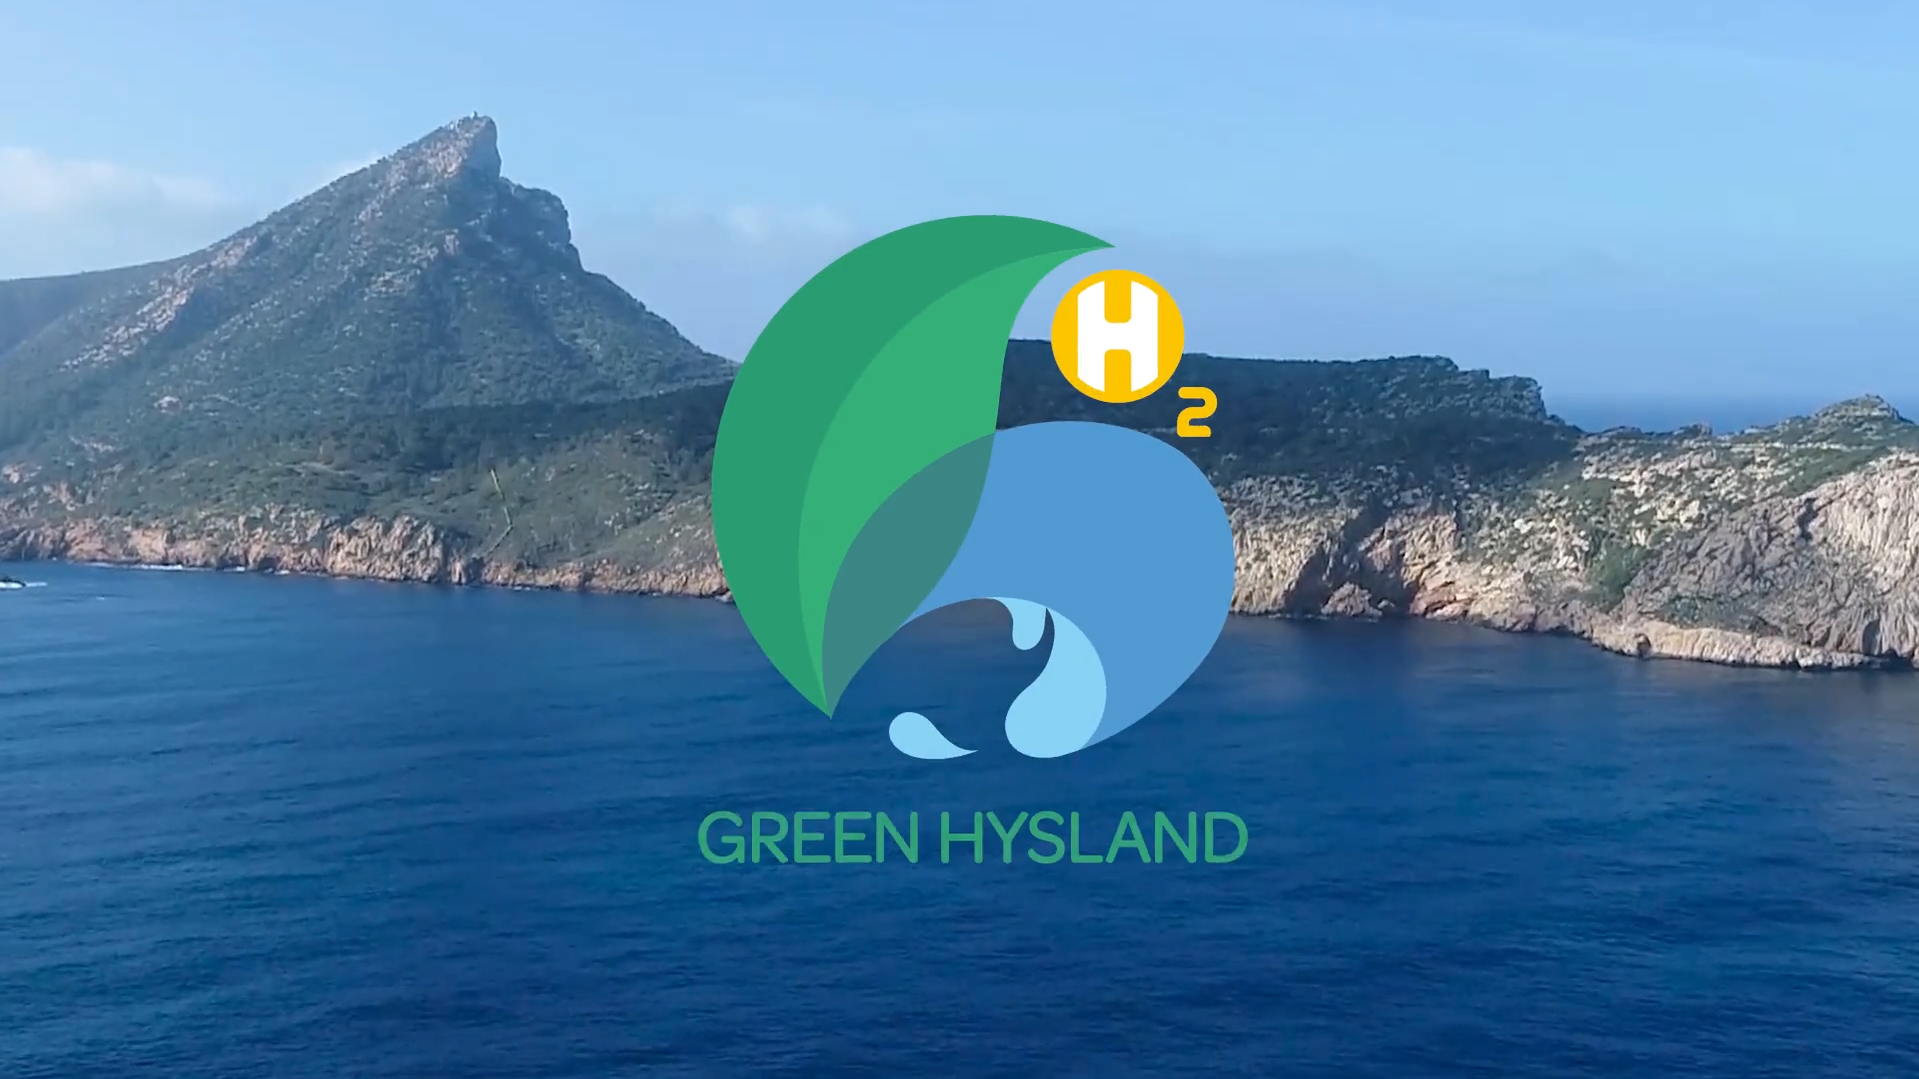 The first Green Hysland video is out